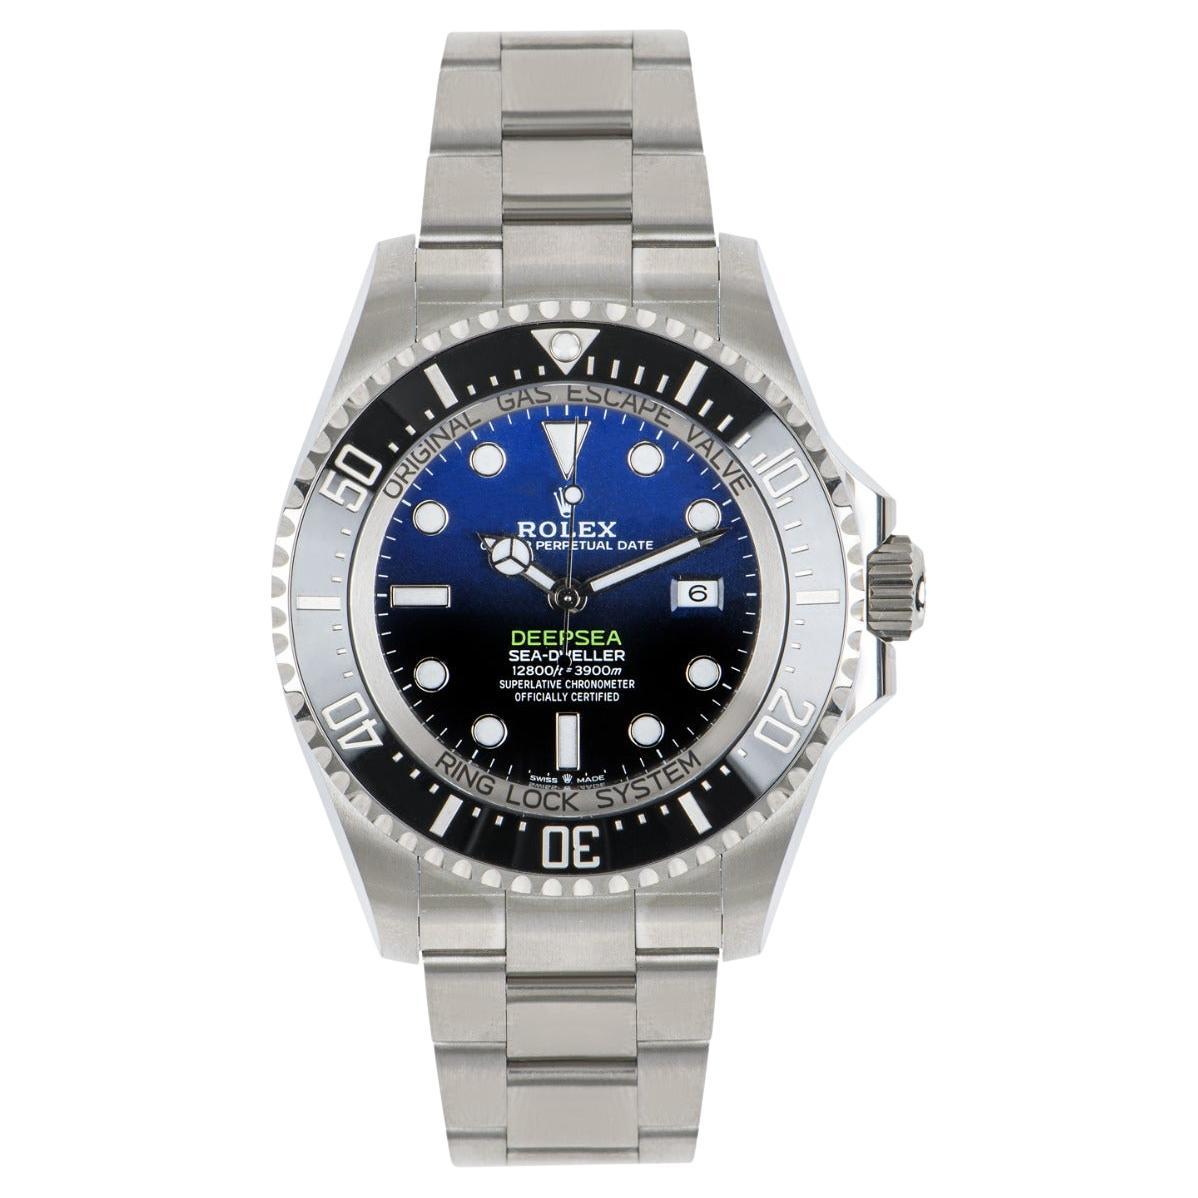 How much is a Rolex Sea Dweller?